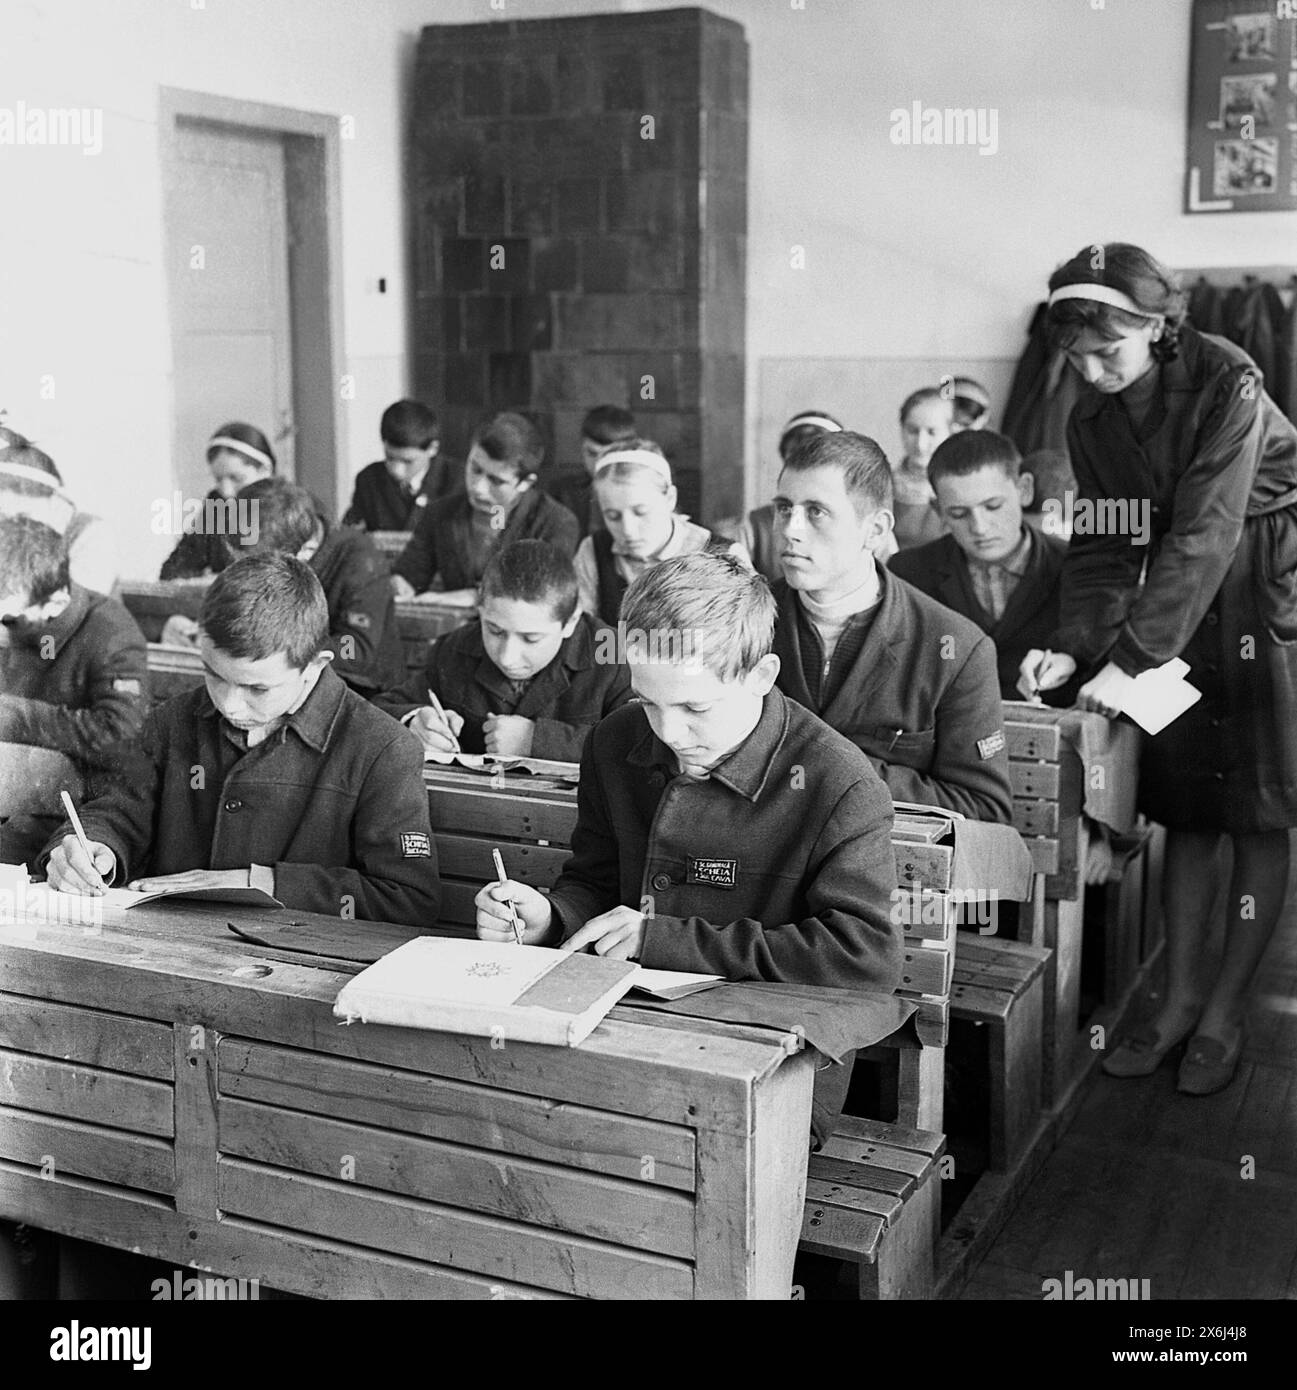 Șcheia, Suceava County, Socialist Republic of Romania  in the 1970s. 'Pioneers', students in middle school wearing the standardized communist uniform, during a class. This rural school had simple wooden furniture and a large terracotta wood stove for heating. Stock Photo